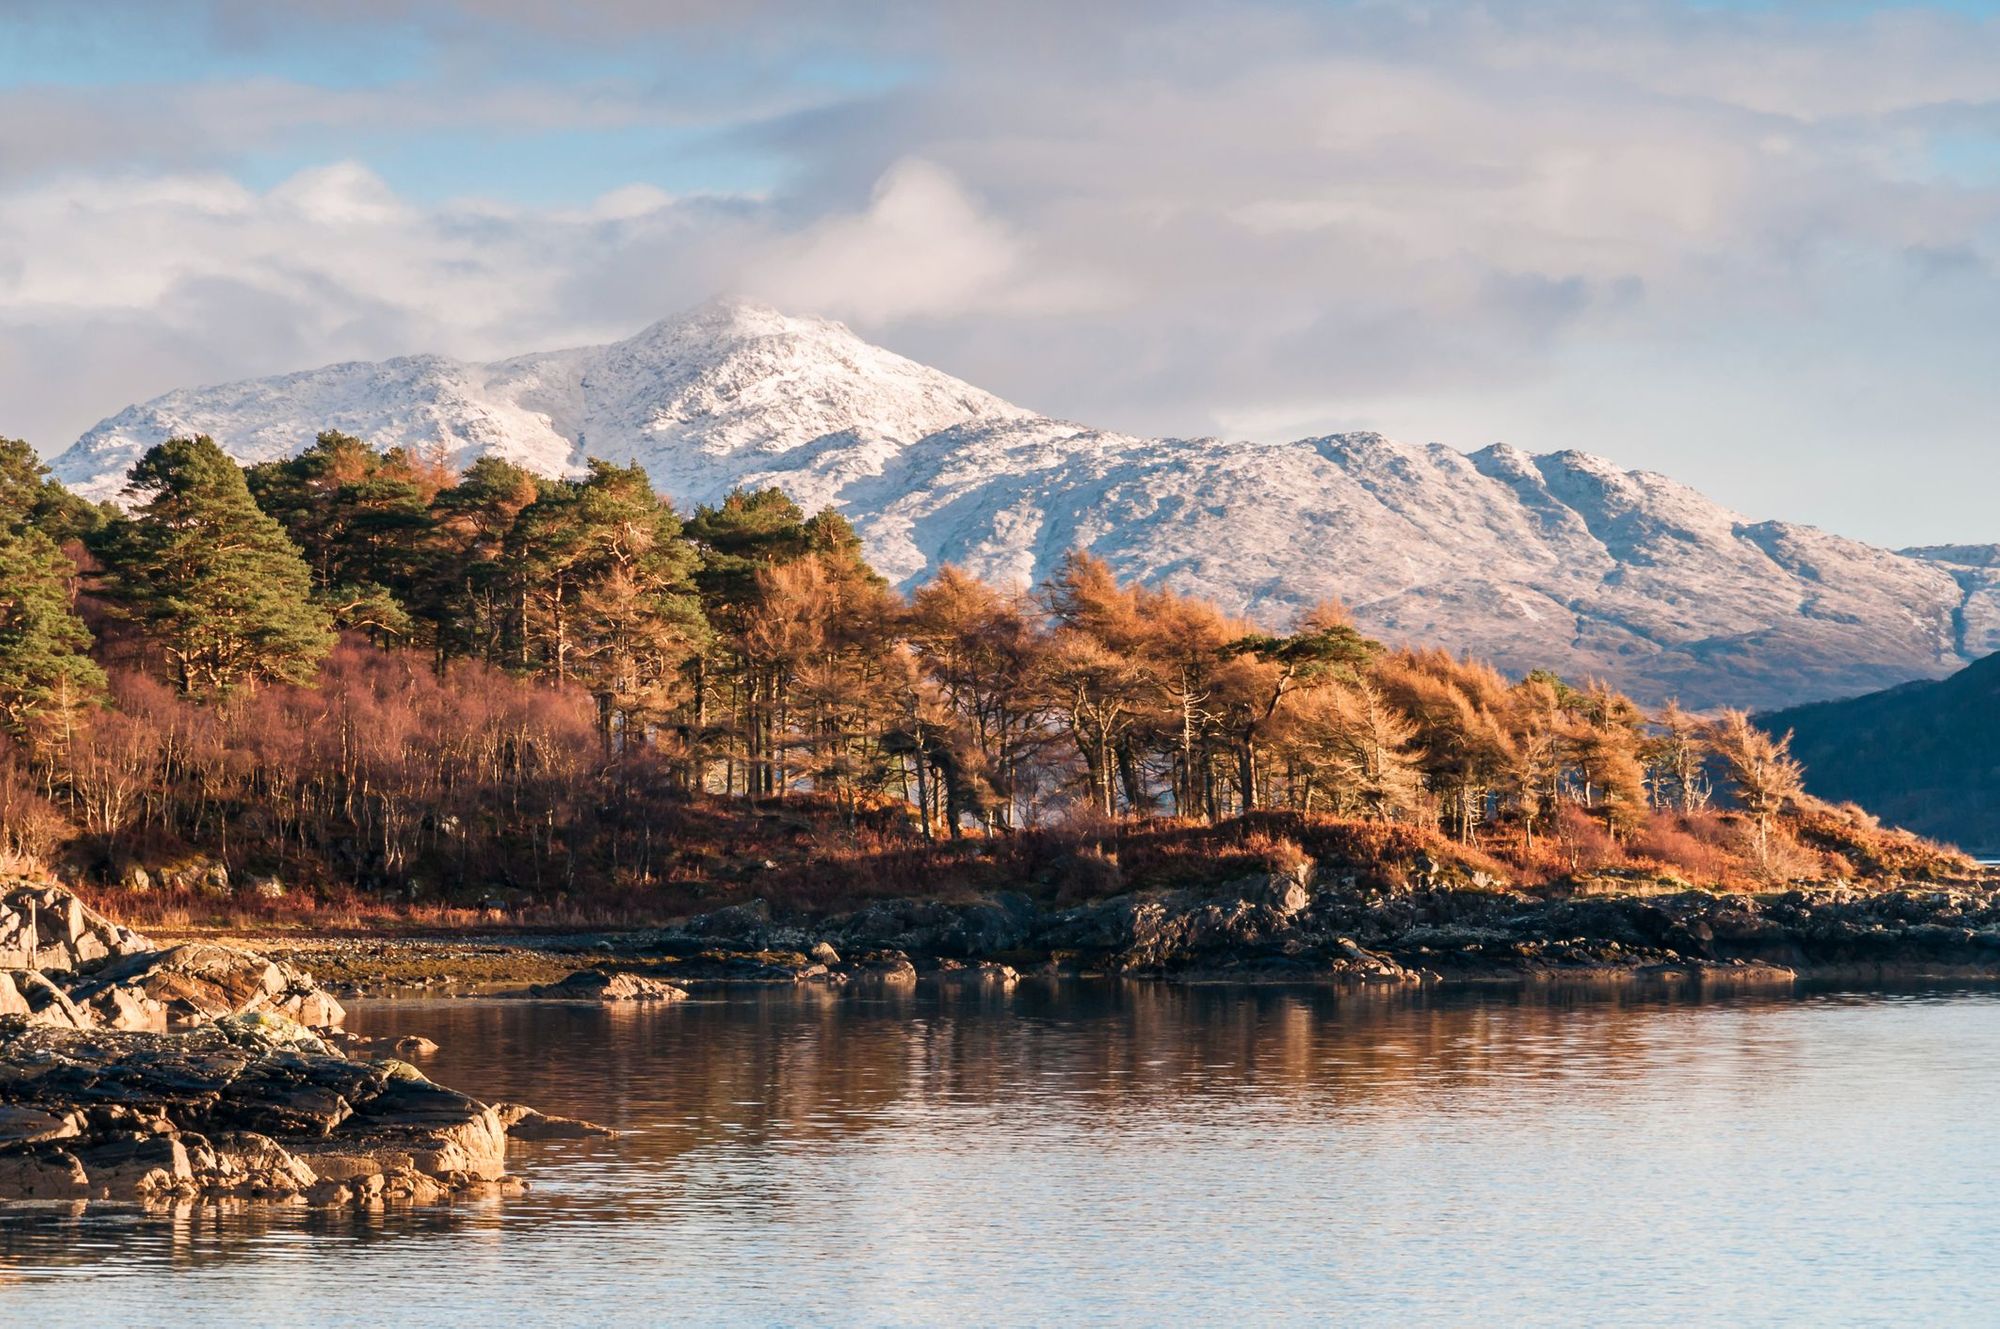 Looking North East along Loch Sunart to a snow capped Ben Resipol in the background, Ardnamurchan, Lochaber, Scotland.